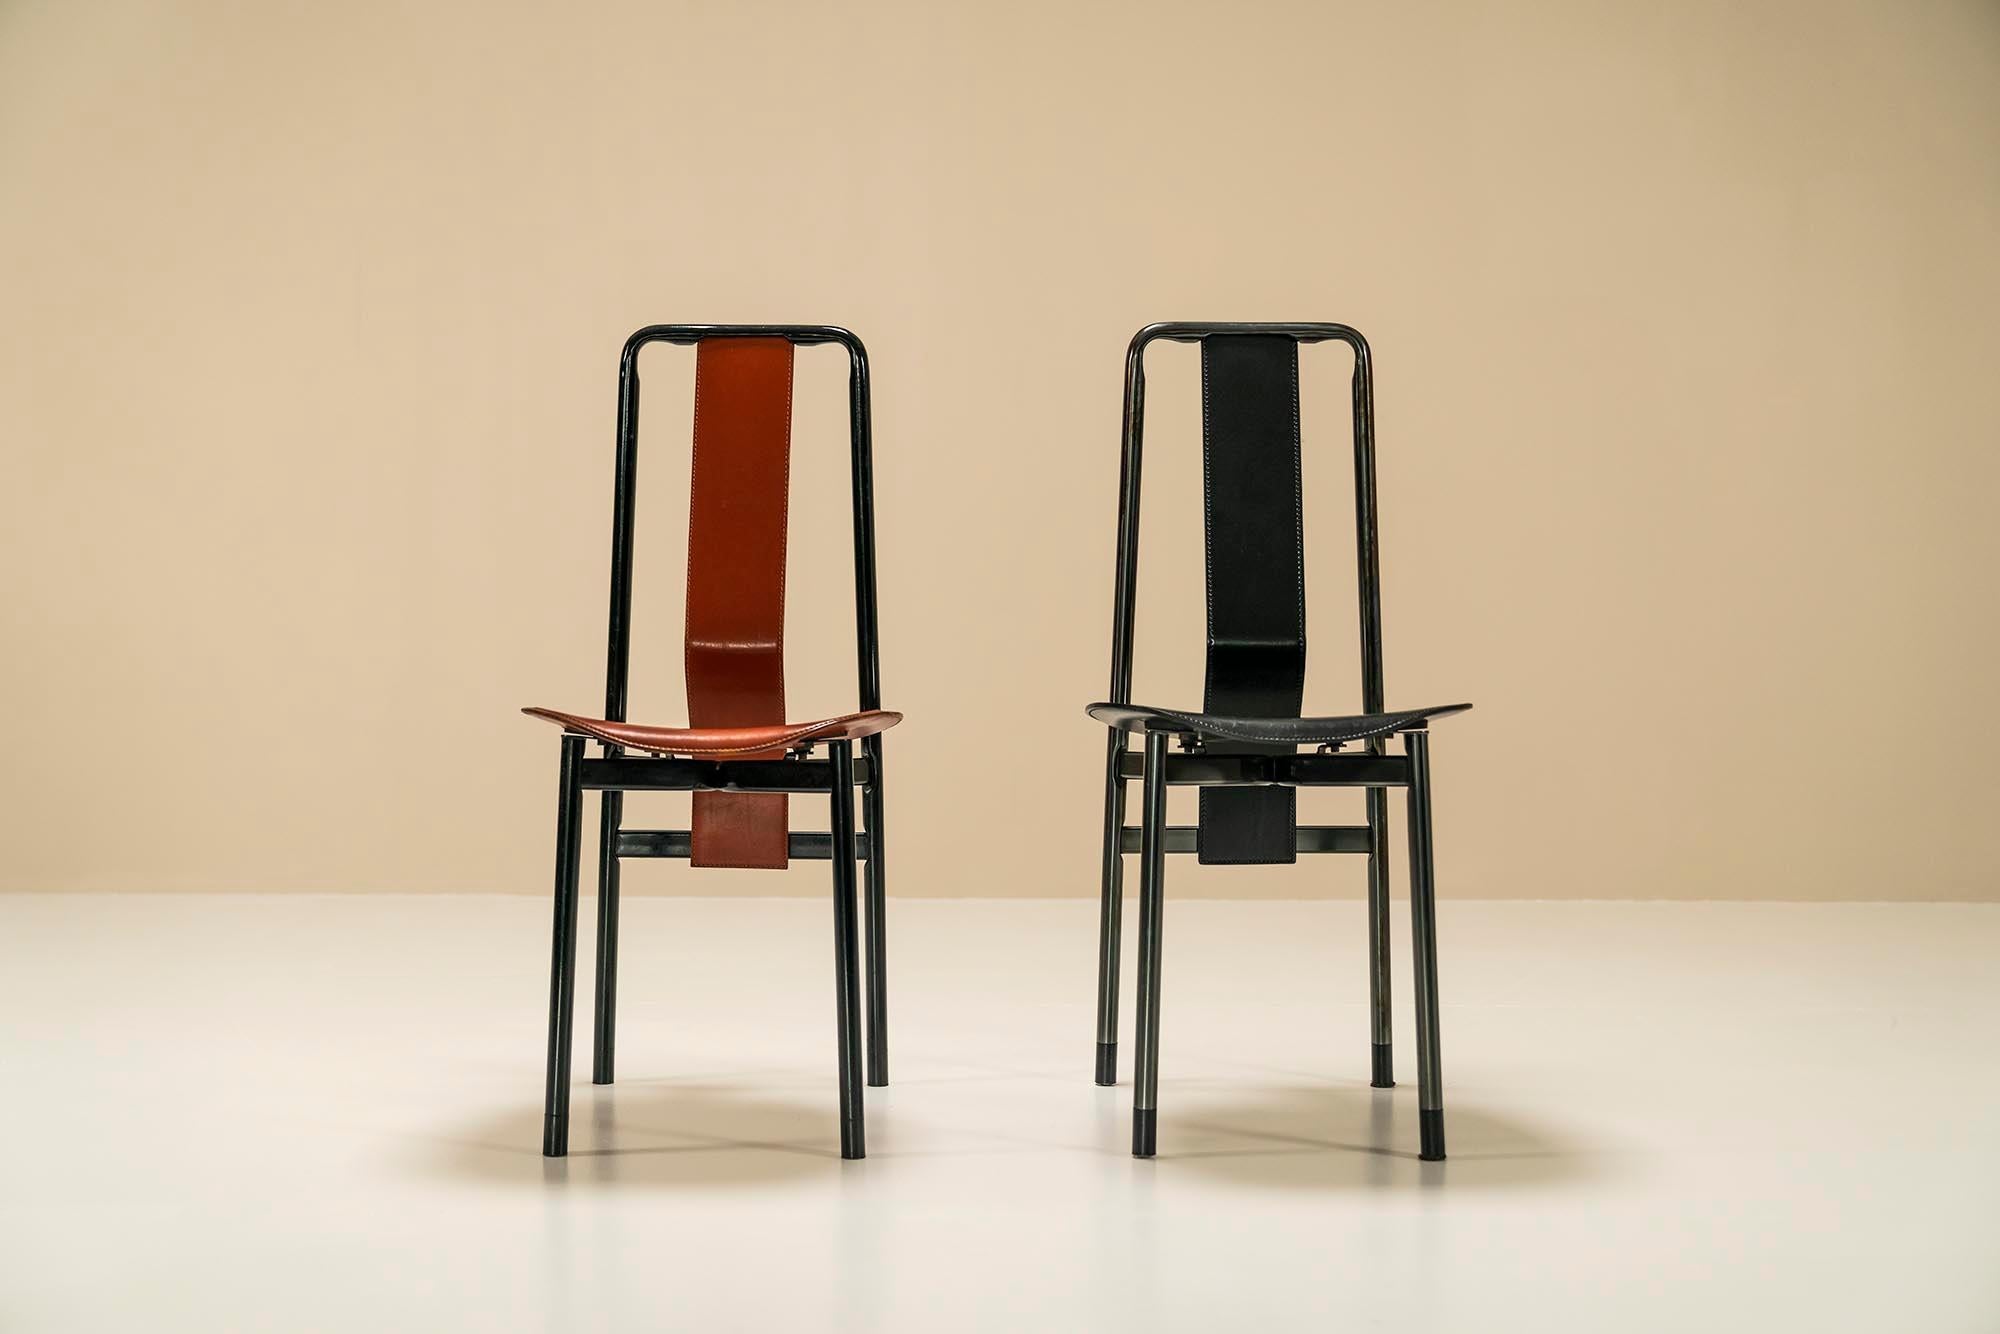 Steel Set of 8 “Irma” Dining Chairs by Achille Castiglioni for Zanotta, Italy 1970s For Sale